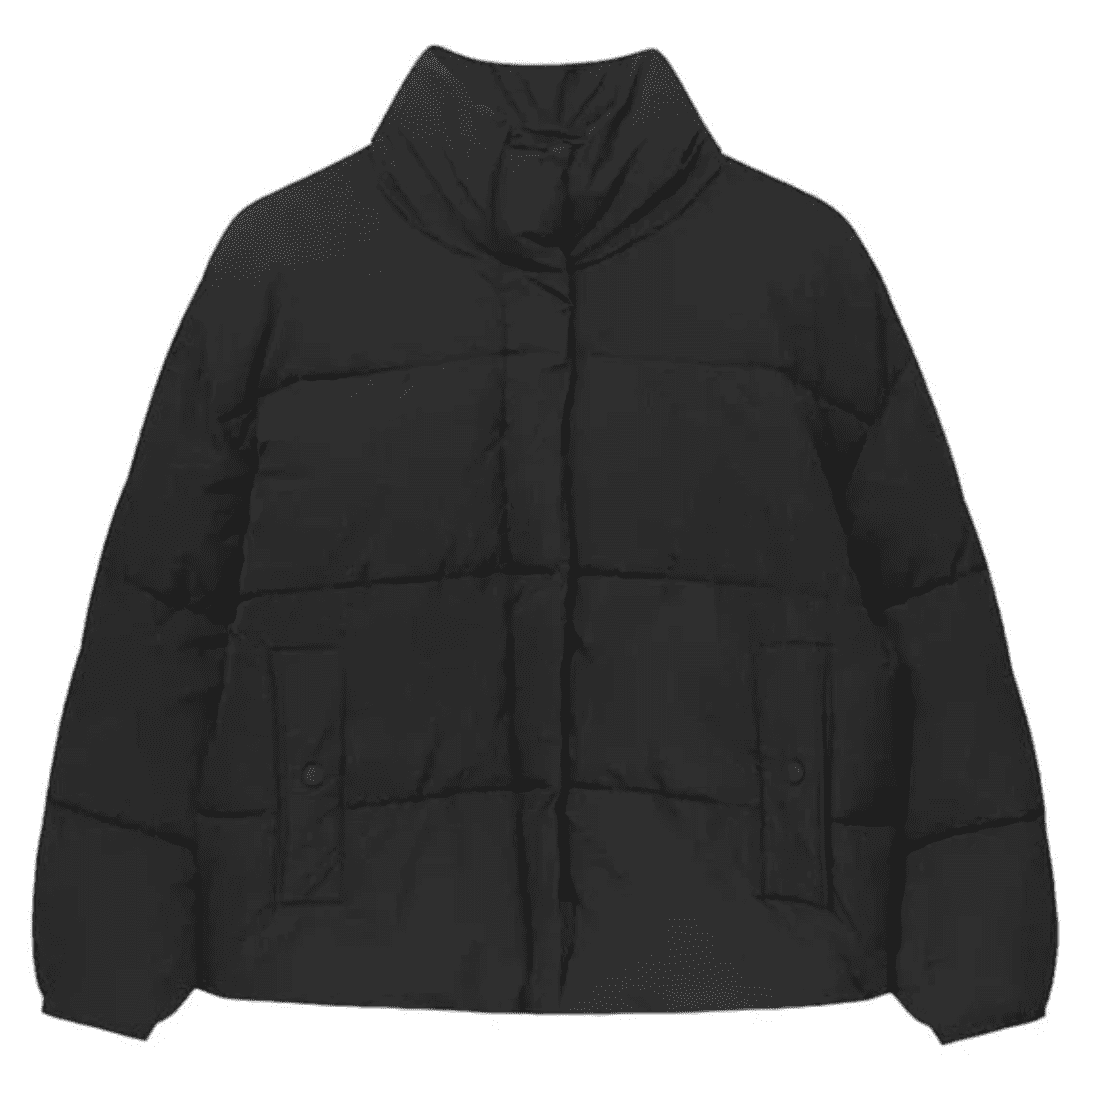 Pull & Bear Puffer Jacket with Funnel Collar in Black, Size XS ...